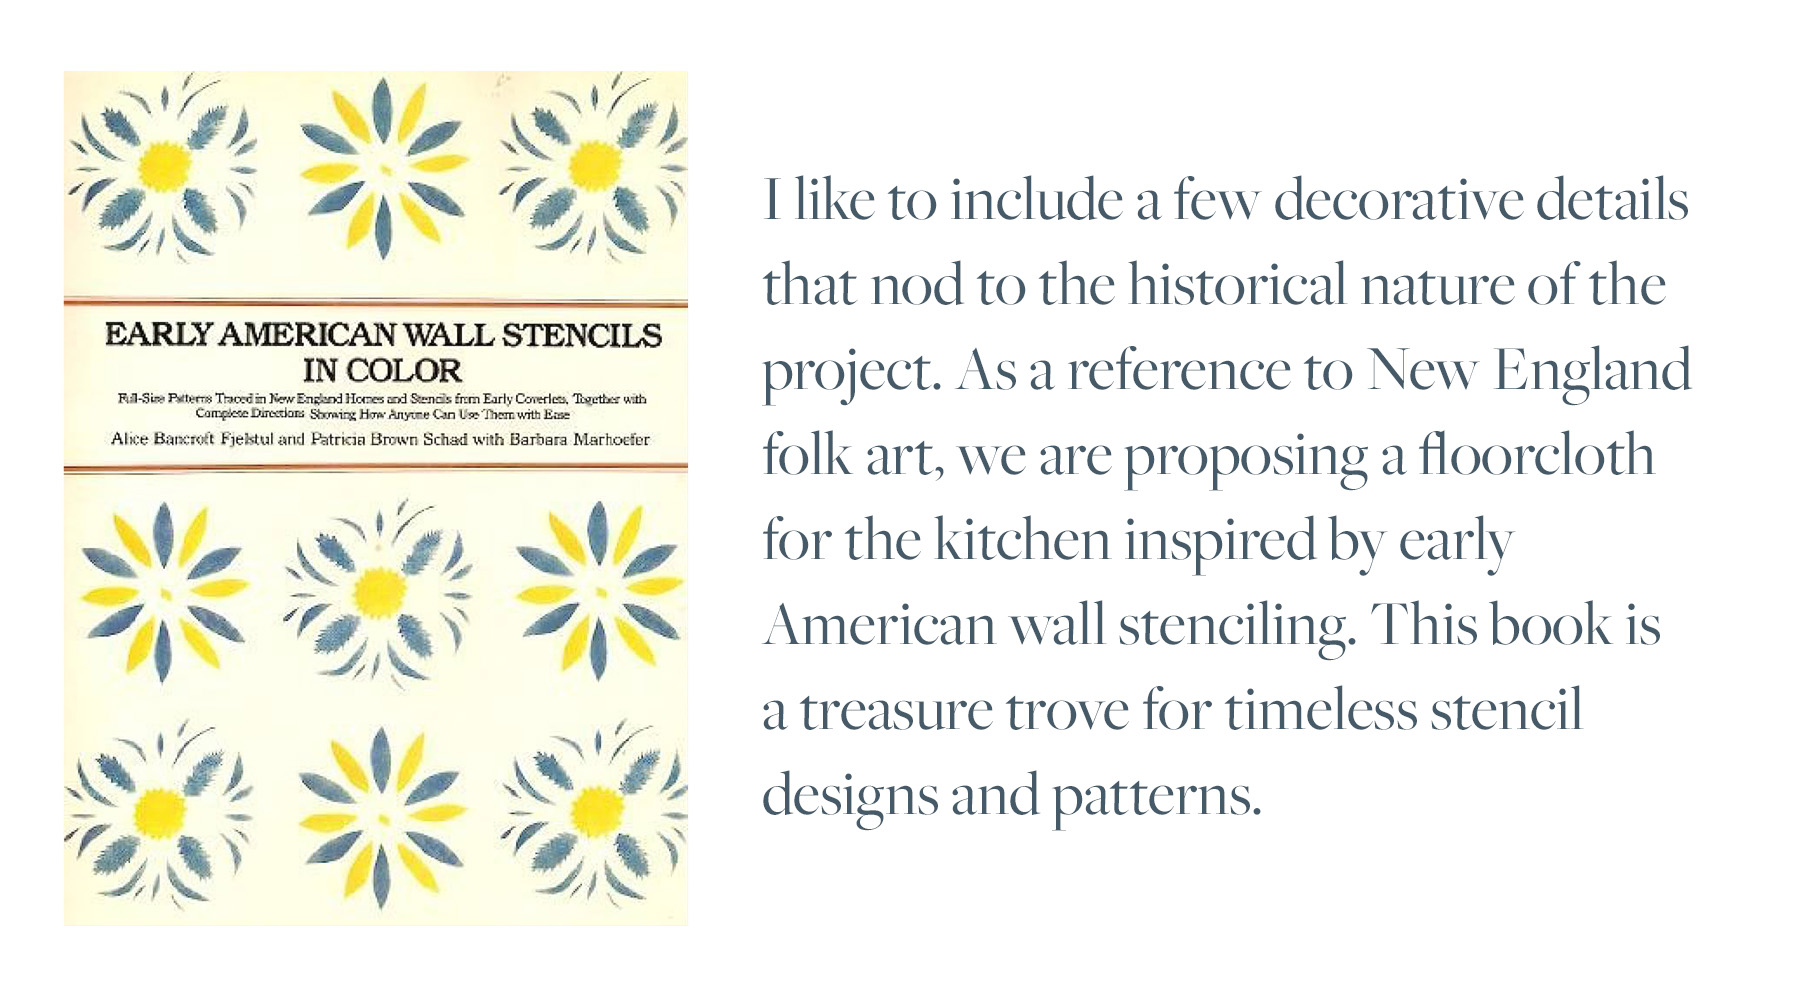 I like to include a few decorative details that nod to the historical nature of the project. As a reference to New England folk art, we are proposing a floorcloth for the kitchen inspired by carly American wall stenciling. This book is a treasure trove for timeless stencil designs and patterns.